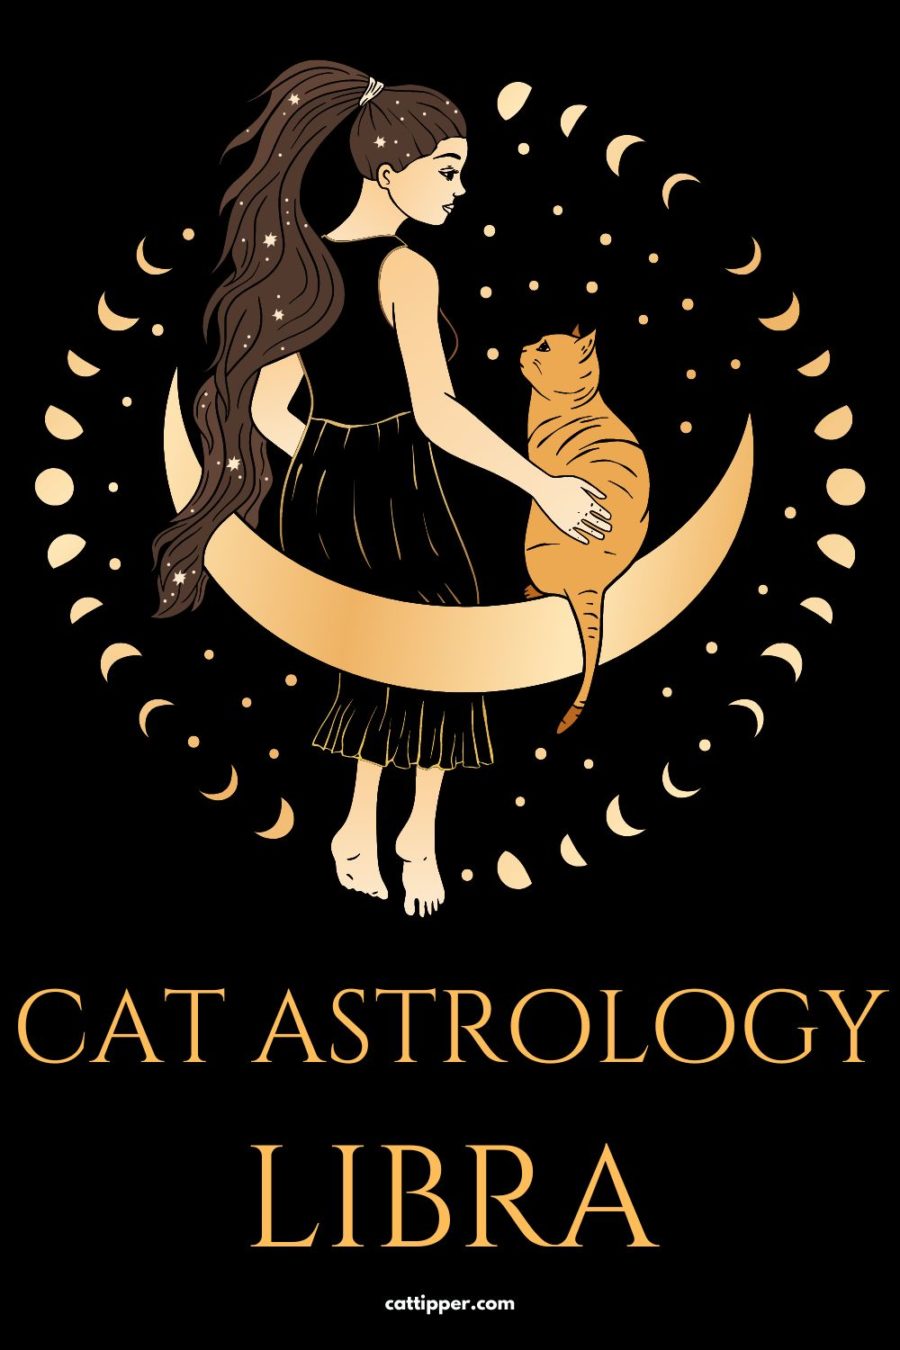 Astrology for Cats: The Libra Cat